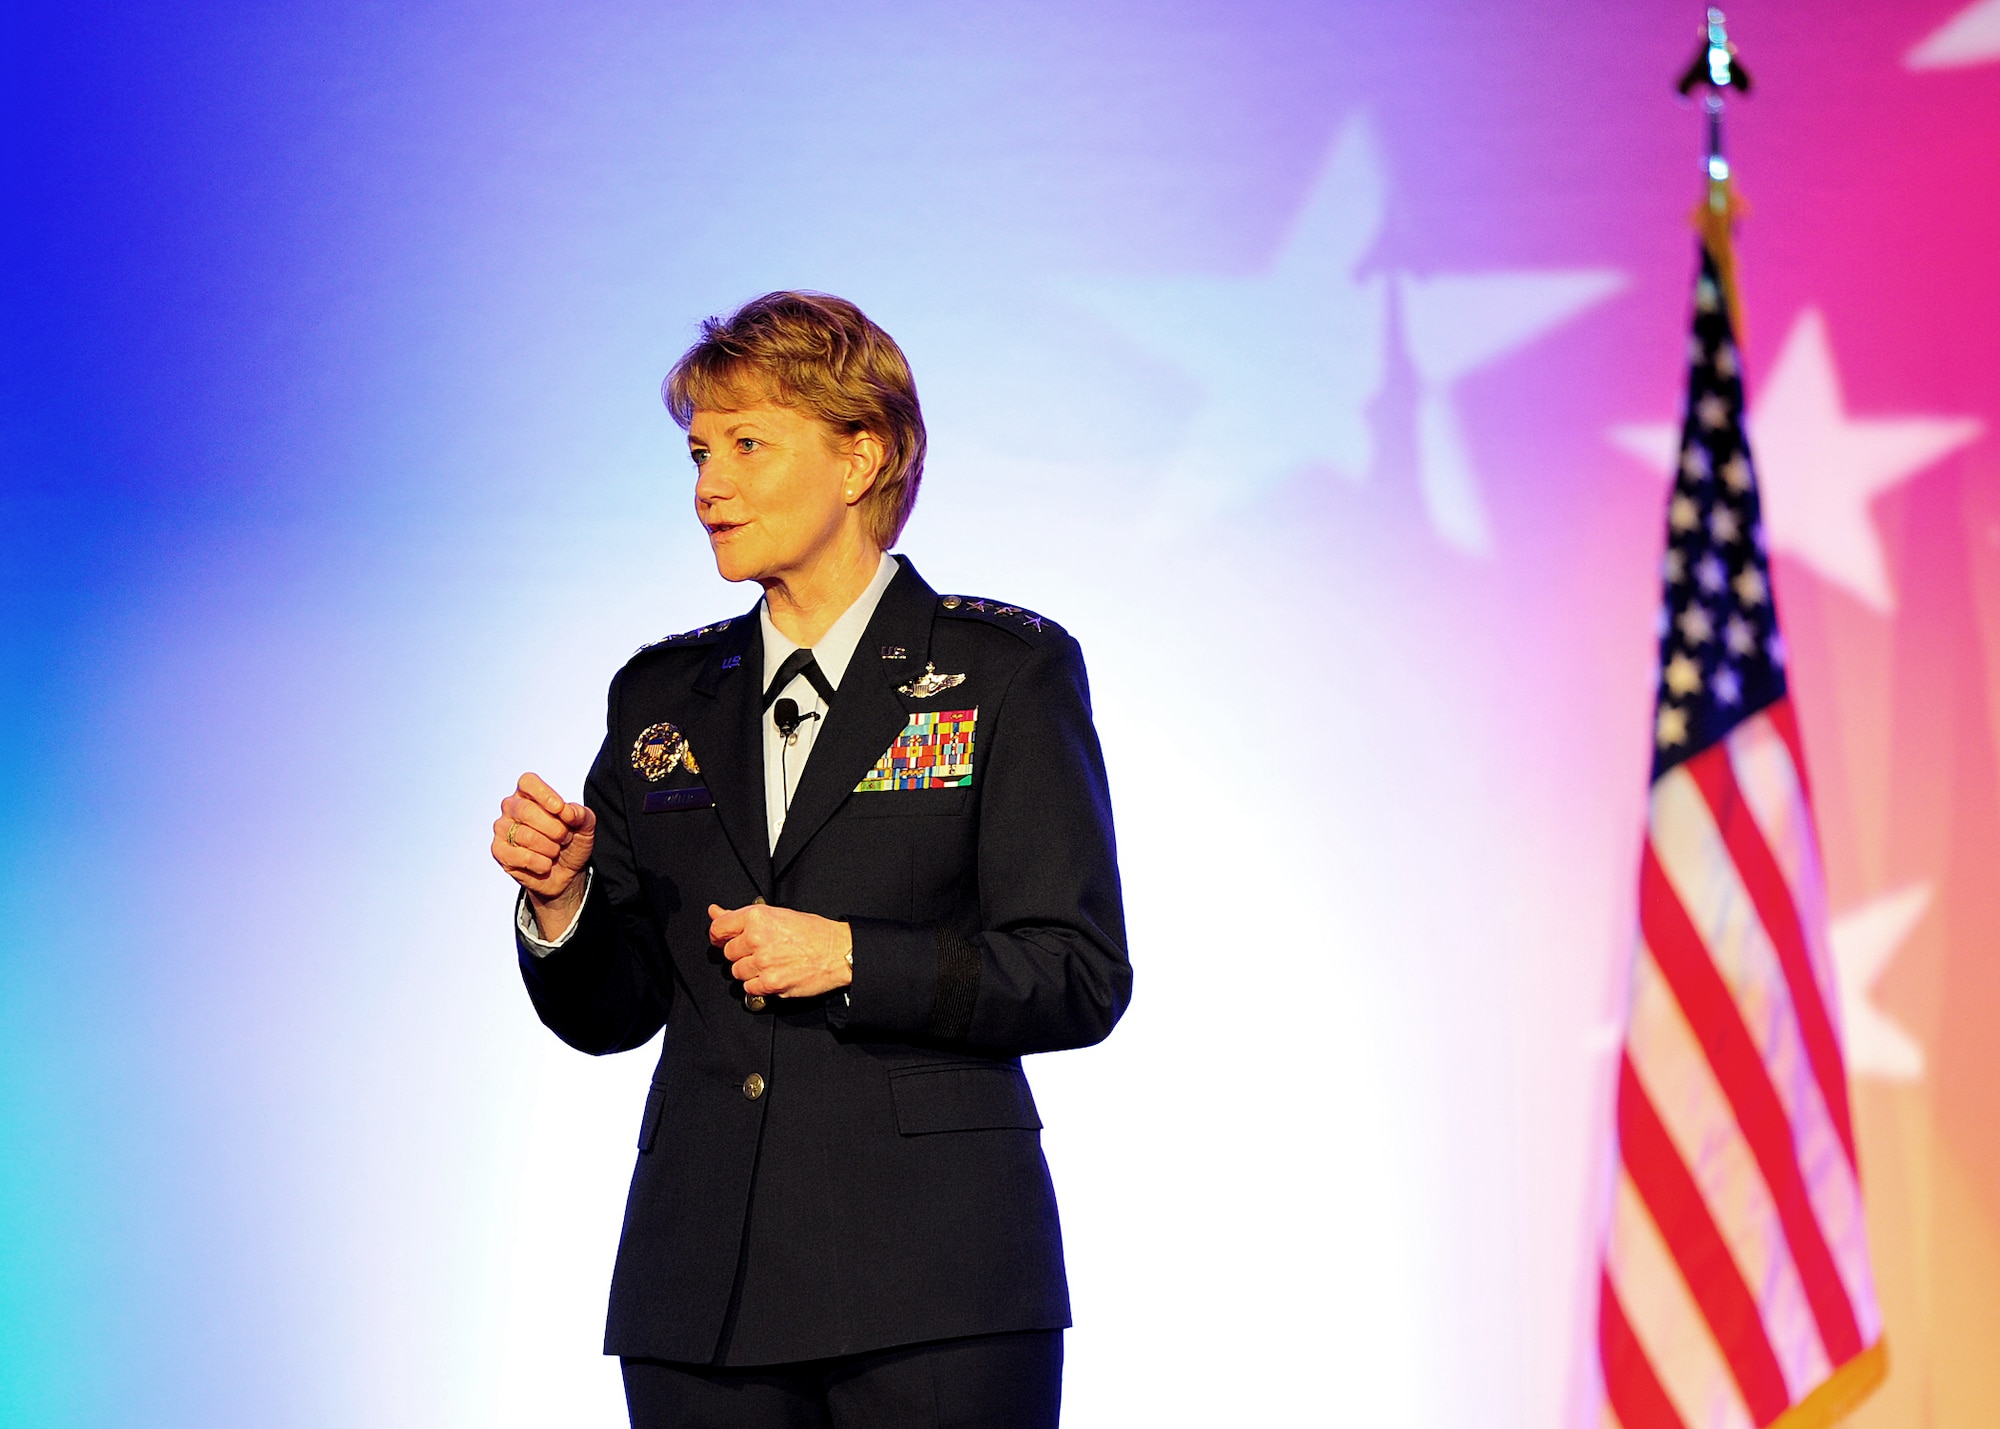 Chief of Air Force Reserve Command, Lt. Gen. Maryanne Miller, gives opening remarks at the Outstanding Airman of the Year banquet for AFRC at the Sawgrass Marriott Golf Resort, Ponte Vedra Beach, Florida, April 12, 2017. (U.S. Air Force photo by Tech. Sgt. Stephen D. Schester)